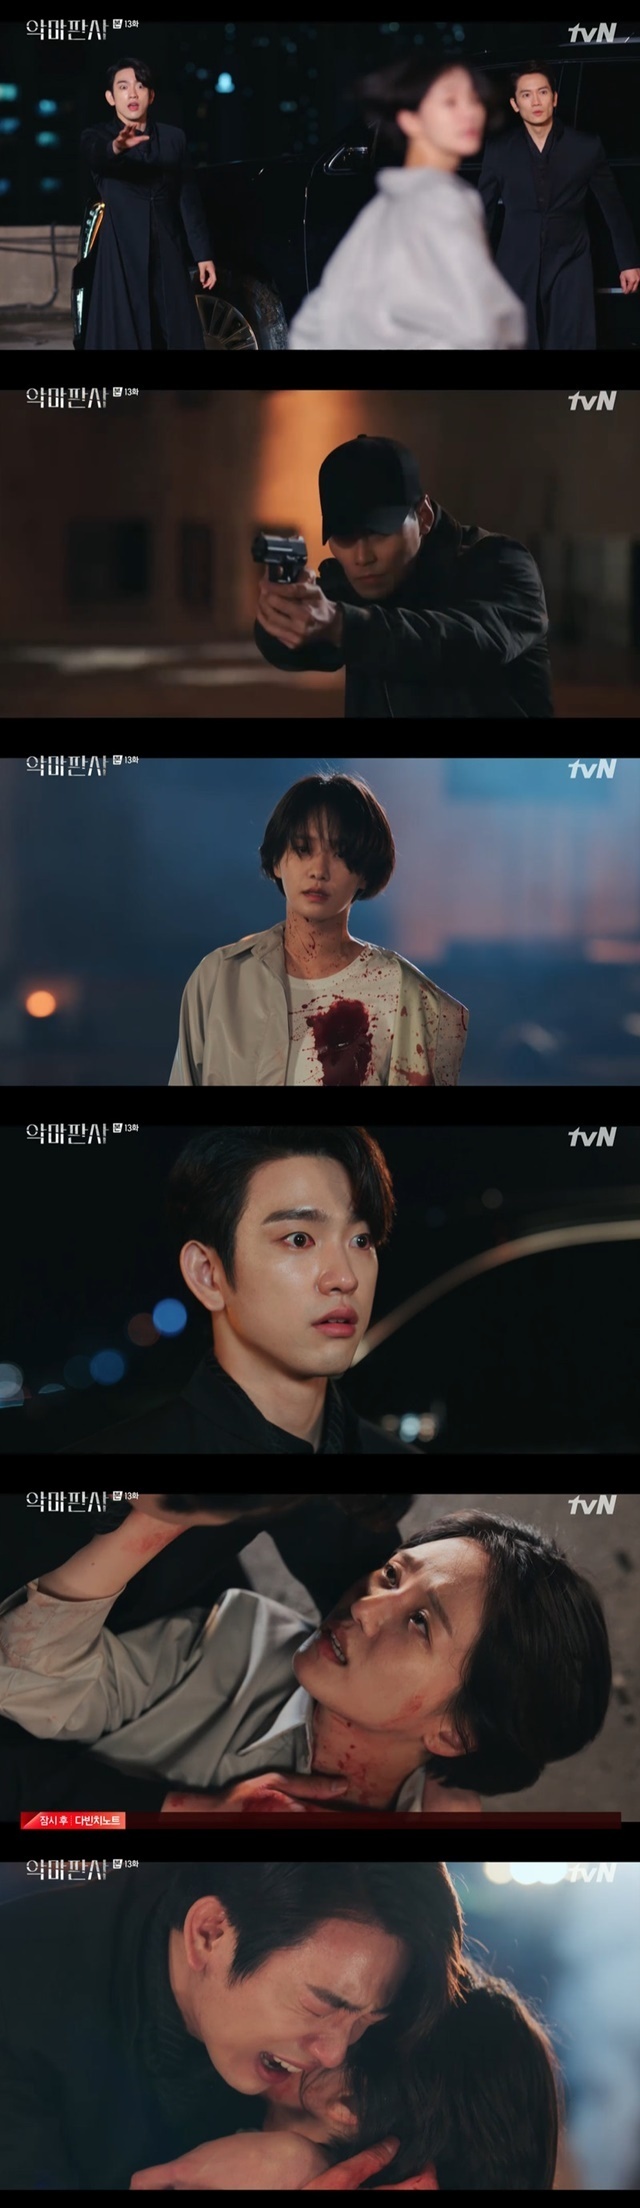 Park Gyoo-yeong was shot and killed in front of Jinyoungs eyes.In the 13th episode of TVNs Saturday drama The Devil Judge, which aired on August 14, Yoon Soo-hyun (Park Gyoo-yeong) was killed.Jeong Seon (Kim Min-jung) killed his helper K (Lee Gi-taek) saying, I hope that Kang (Jin-sung) will be lonely, and Ga-on Kim (Jinyoung) also put him in danger.Kang called Yoon Soo-hyun (Park Gyoo-yeong) and asked him to start with Ga-on Kim, and when Elijah (Jeon Chae-eun) did not answer the phone, he lost consciousness.All those who helped John were kidnapped by the Social Responsibility Foundation.The late lawyer (Park Hyung-soo) fled and placed the man in a first-aid position, and he went to his nephew Elijah.Jeong Seon came to Elijah with Jae-hee (Lee So-young) and went back to threaten, and John was relieved to hug Elijah.Yoon rescued Ga-on Kim and treated him first, and Ga-on Kim apologized, Im sorry, I saw you like that. When Cha Kyung-hee died.Ga-on Kim then said, He doesnt deserve to be around you. Hes been like this since he was a kid.I feel like Im going to die, he said, kissing Confessions.Ga-on Kim then told Oh Jin-joo (Kim Jae-kyung), who was leading the social responsibility foundations anti-virus broadcast, I put Jukchang on the front line.Youre being used by the judge, Oh said, and Oh Jin-ju was surprised, saying, Do you want me to believe Judge Kim? But soon, Oh Jin-ju went to the slums and confirmed the truth with his eyes.Is there a virus? Kang visited Heo Jung-se (Baek Hyun-jin) and said, I will put it on trial to tell you what youre doing.Until the angry crowds turn this place into a fire and drag you out like a dog. He intended to blow up the river.Jing Seona decided to fly the trial court and set up Oh Jin-ju as the judge in the emergency court.Oh Jin-ju asked Park Doo-man to draw a picture to take over the popularity of Kang John, and made the broadcast a broadcast that exposes the reality of the emergency relief scene in the slums.The government is hiding the truth and committing violence, said John, and Jukchang (Lee Hae-woon) assaulted an old man who defended him and provoked him to get down.Heo Jung-se cut off the broadcast by blocking the electricity at all, but the Internet broadcast continued with the dike app.The dark cannot beat the light, said John, and when the people who were being suppressed began to fight back, the group fled.Yoon Soo-hyun went to see Ga-on Kim who was stoned in the broadcast, and fell down after being shot by an unidentified gun in front of Ga-on Kim.